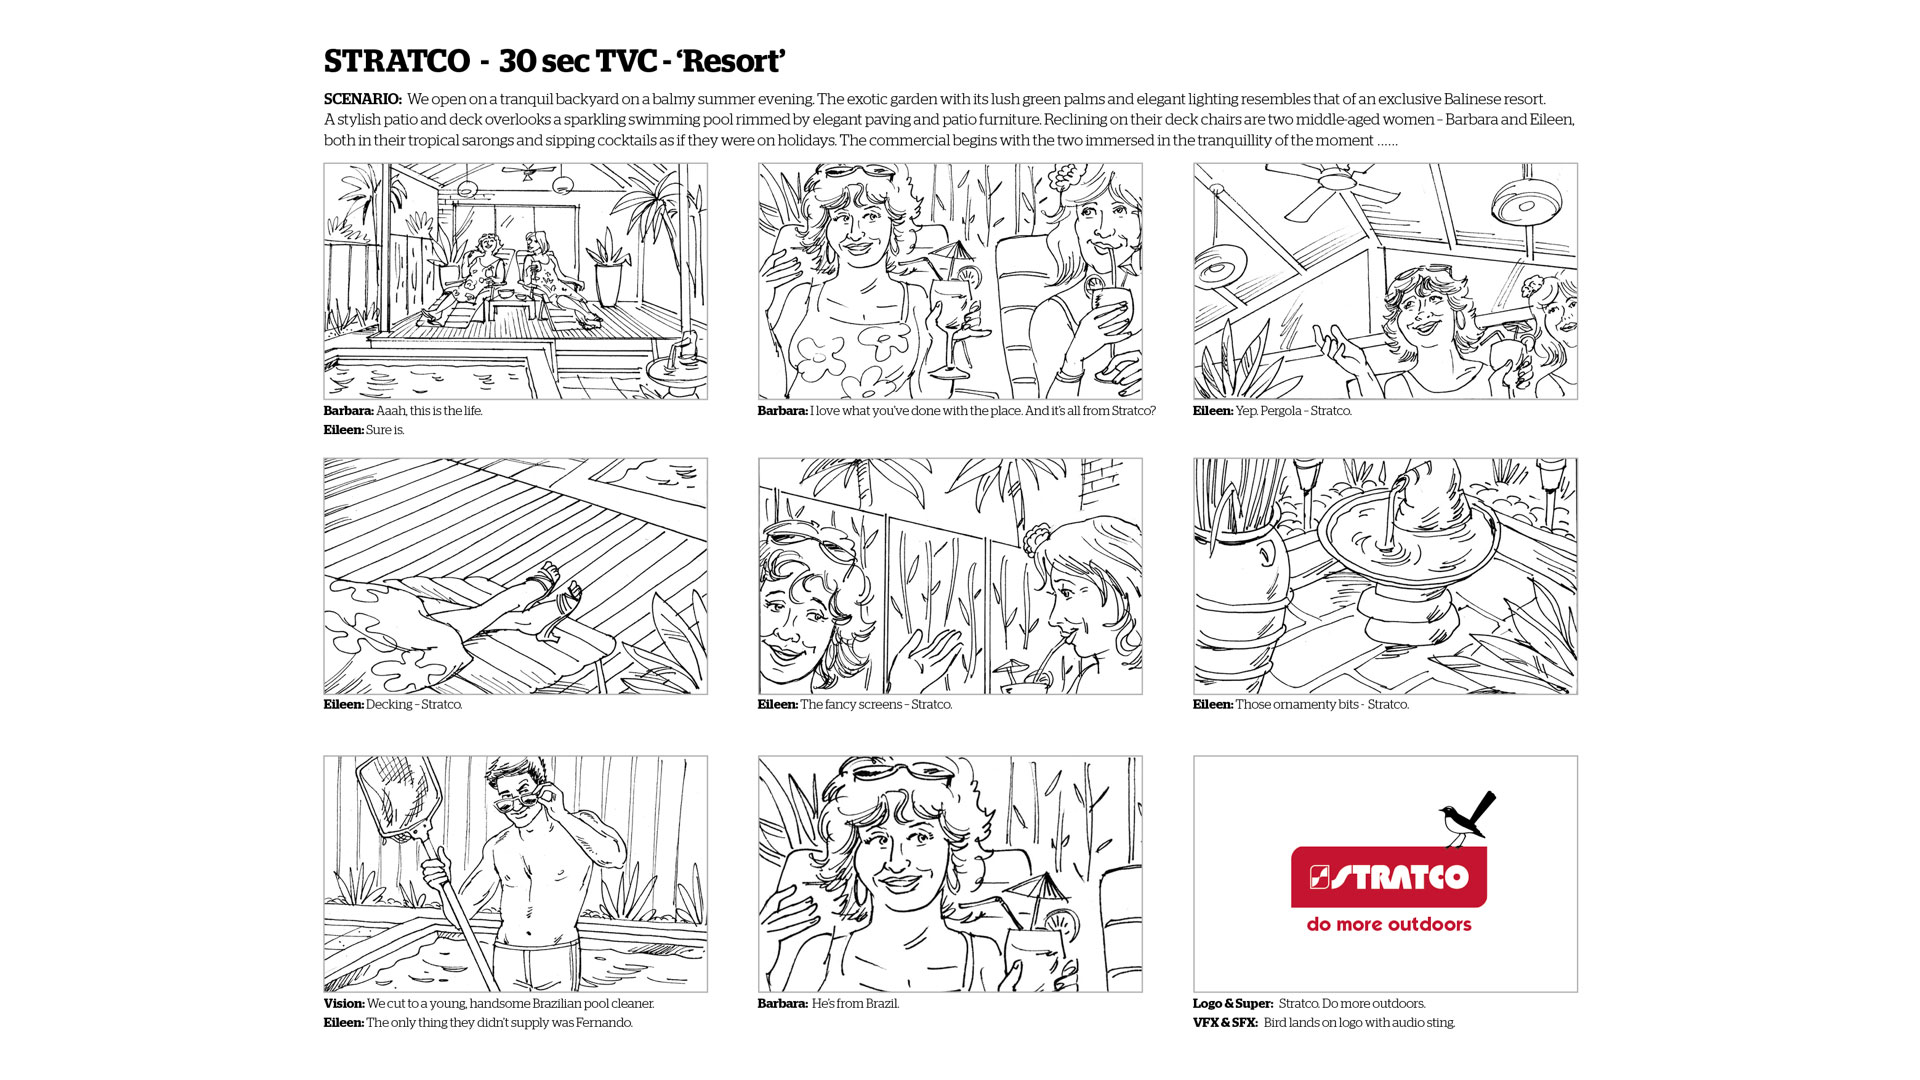 STRATCO Pitch concepts